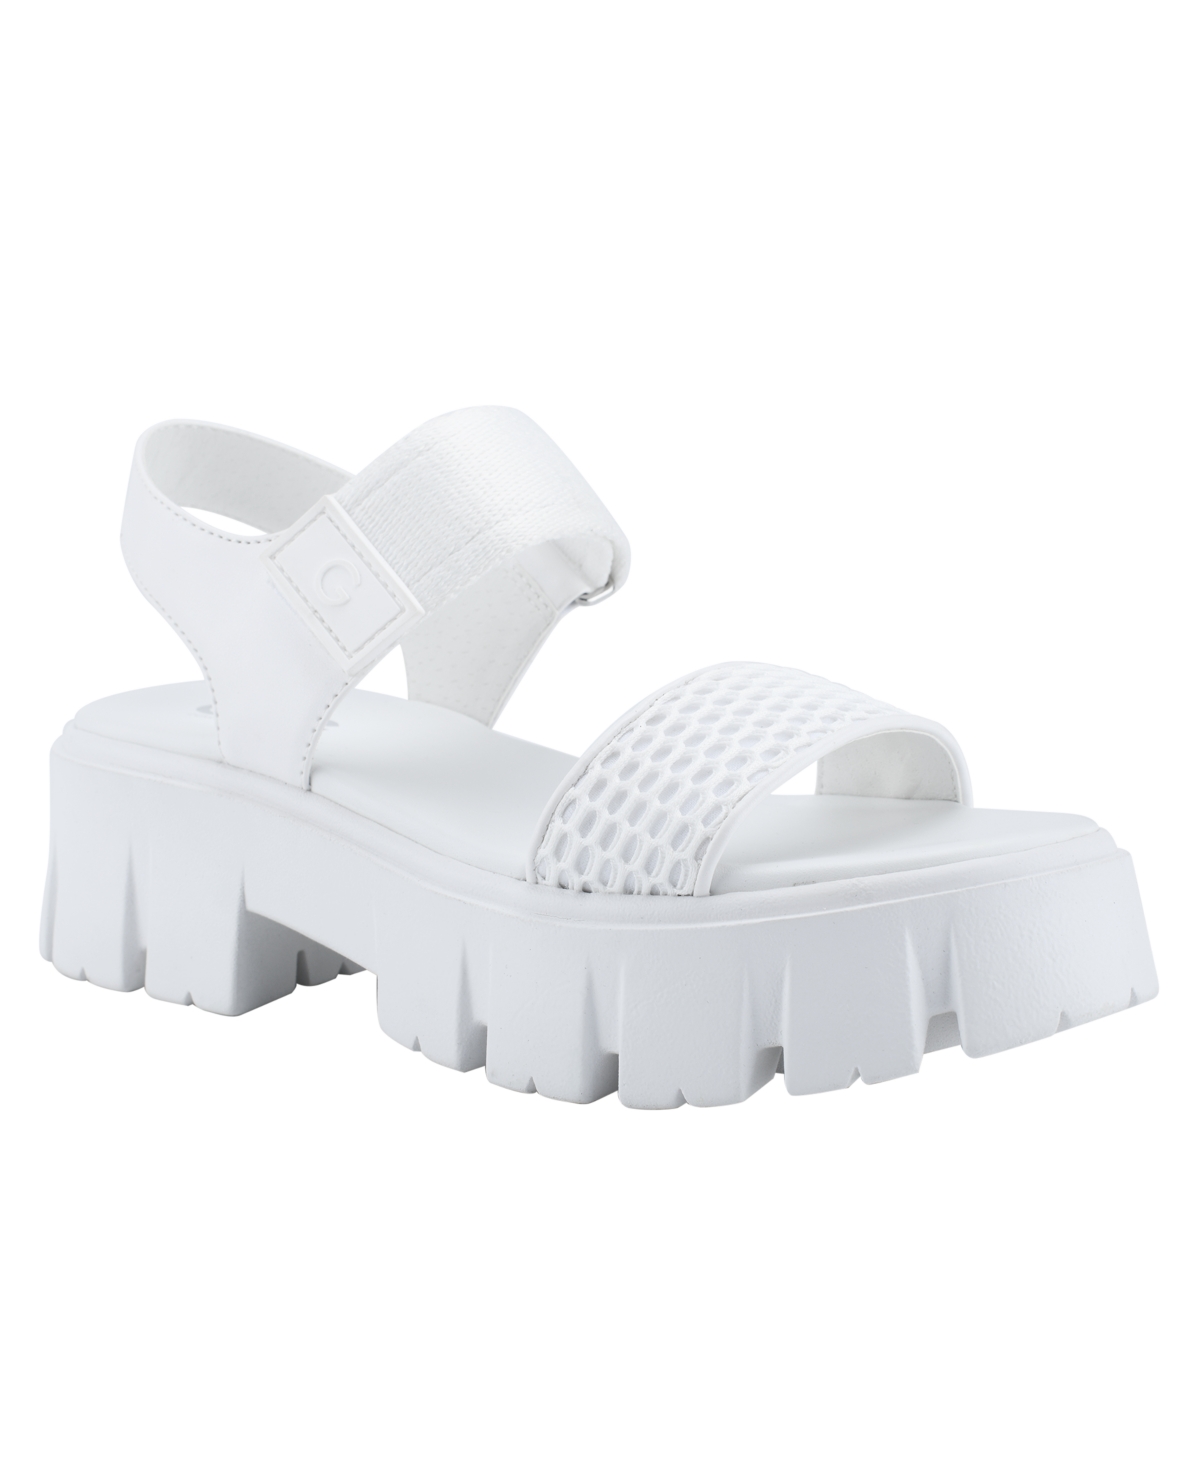 Gbg Los Angeles Women's Premia Lug Sole Sandals Women's Shoes In White